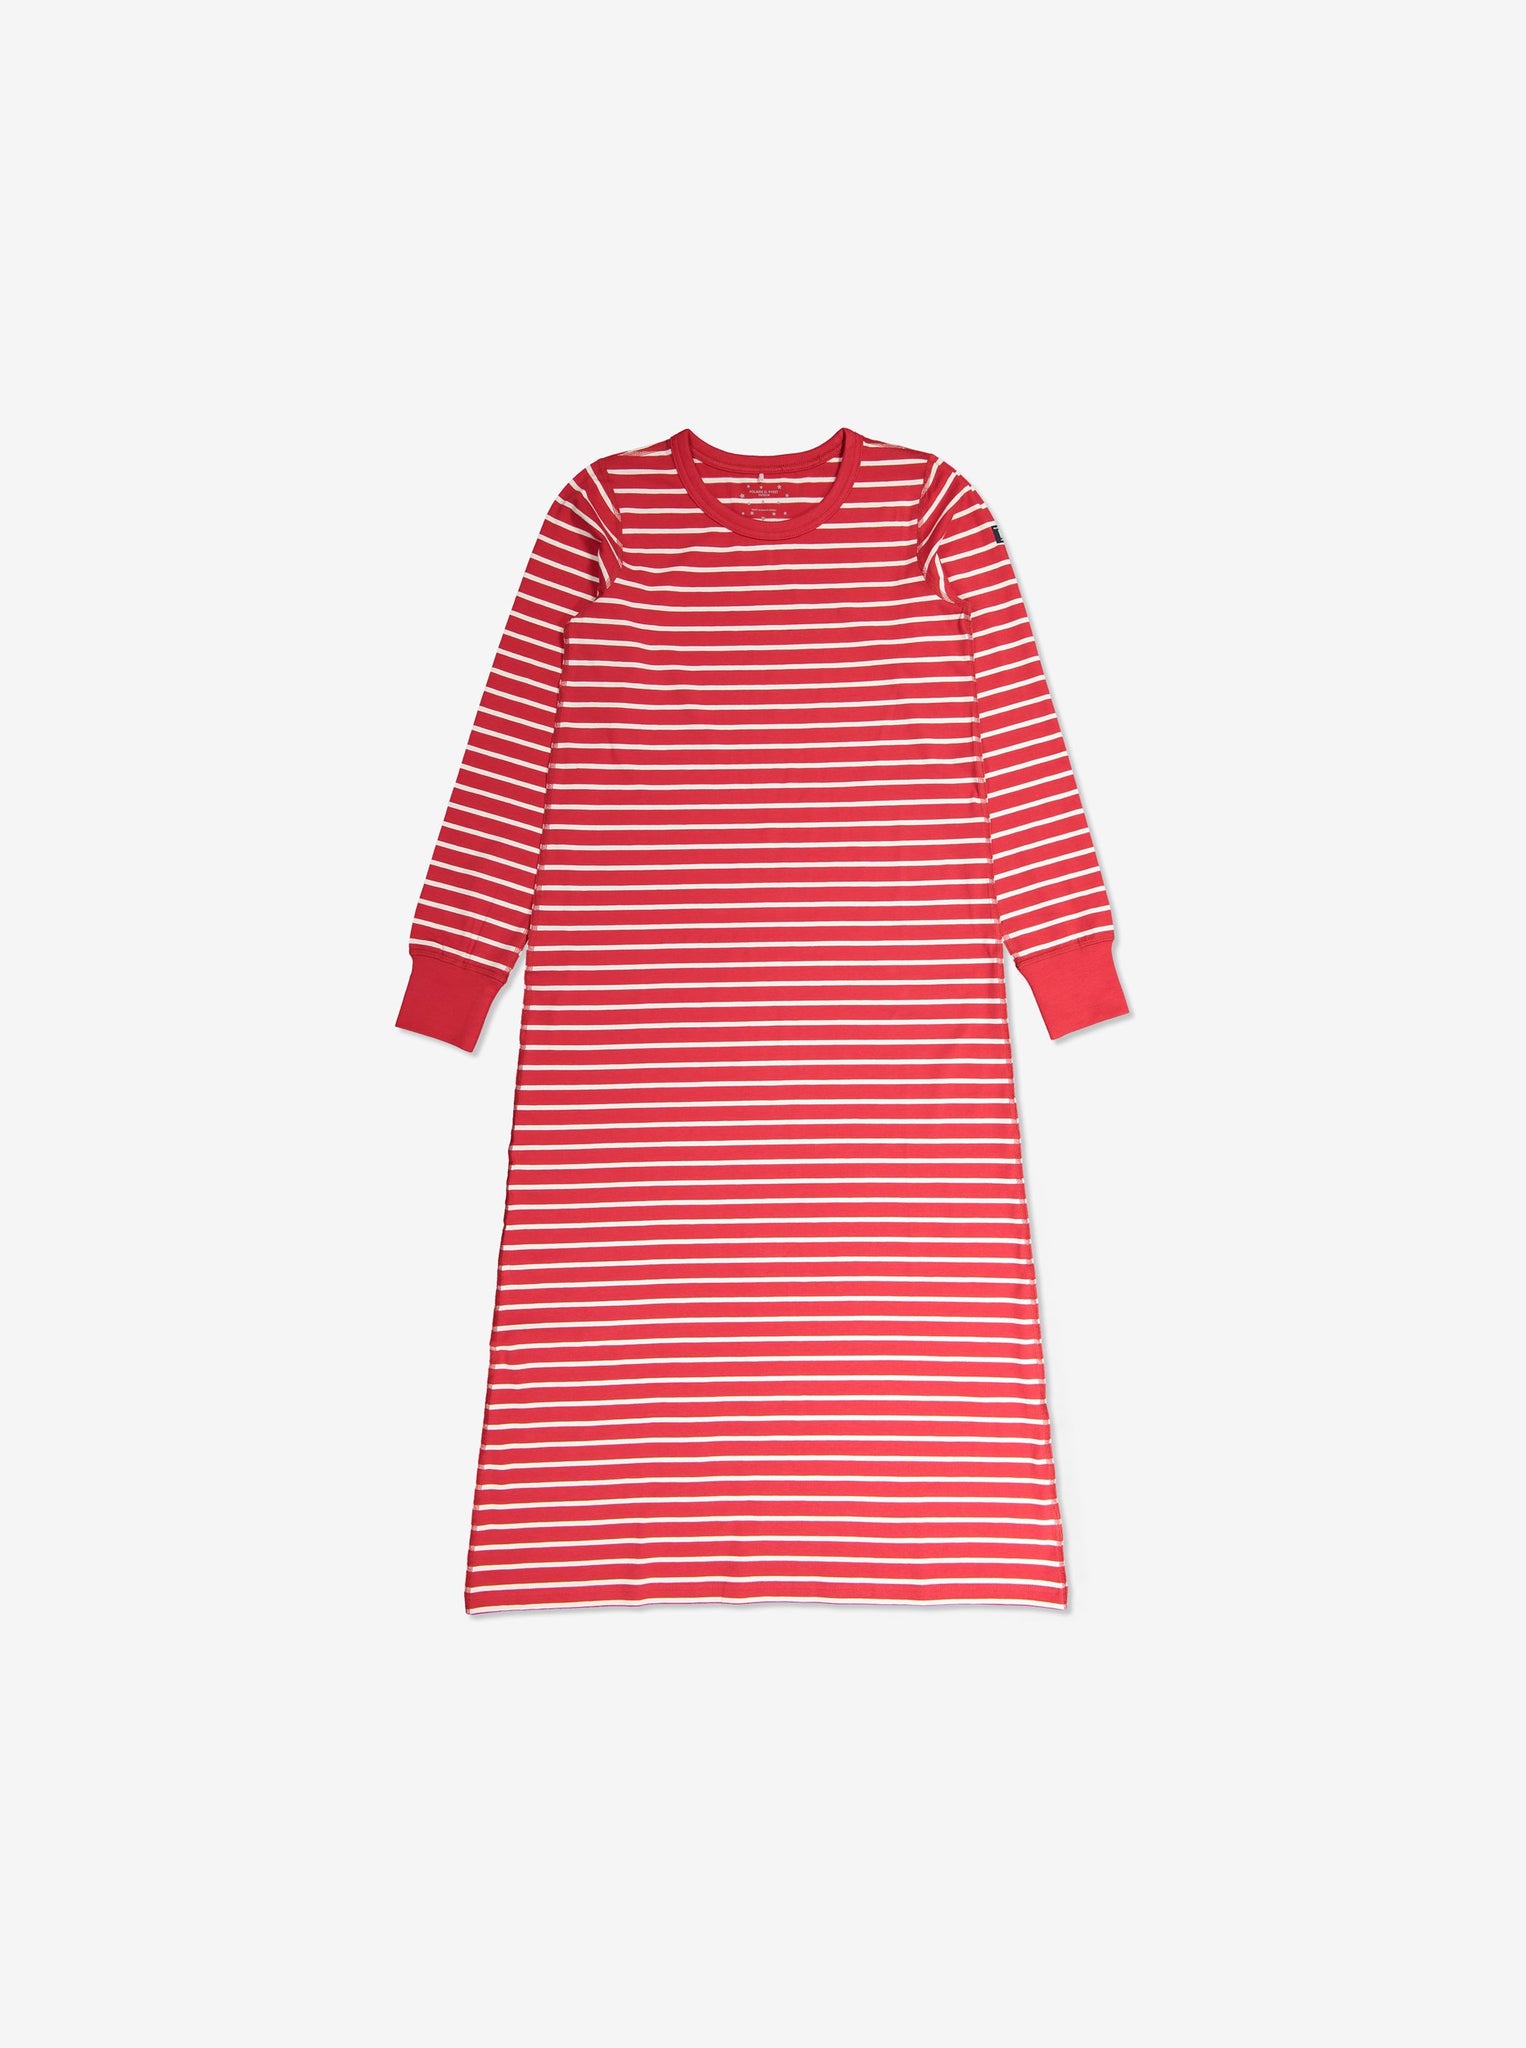 red and white striped Organic Ladies Nightgown, Ladies Sustainable Clothing, warm long lasting durable, polarn o. pyret ethical